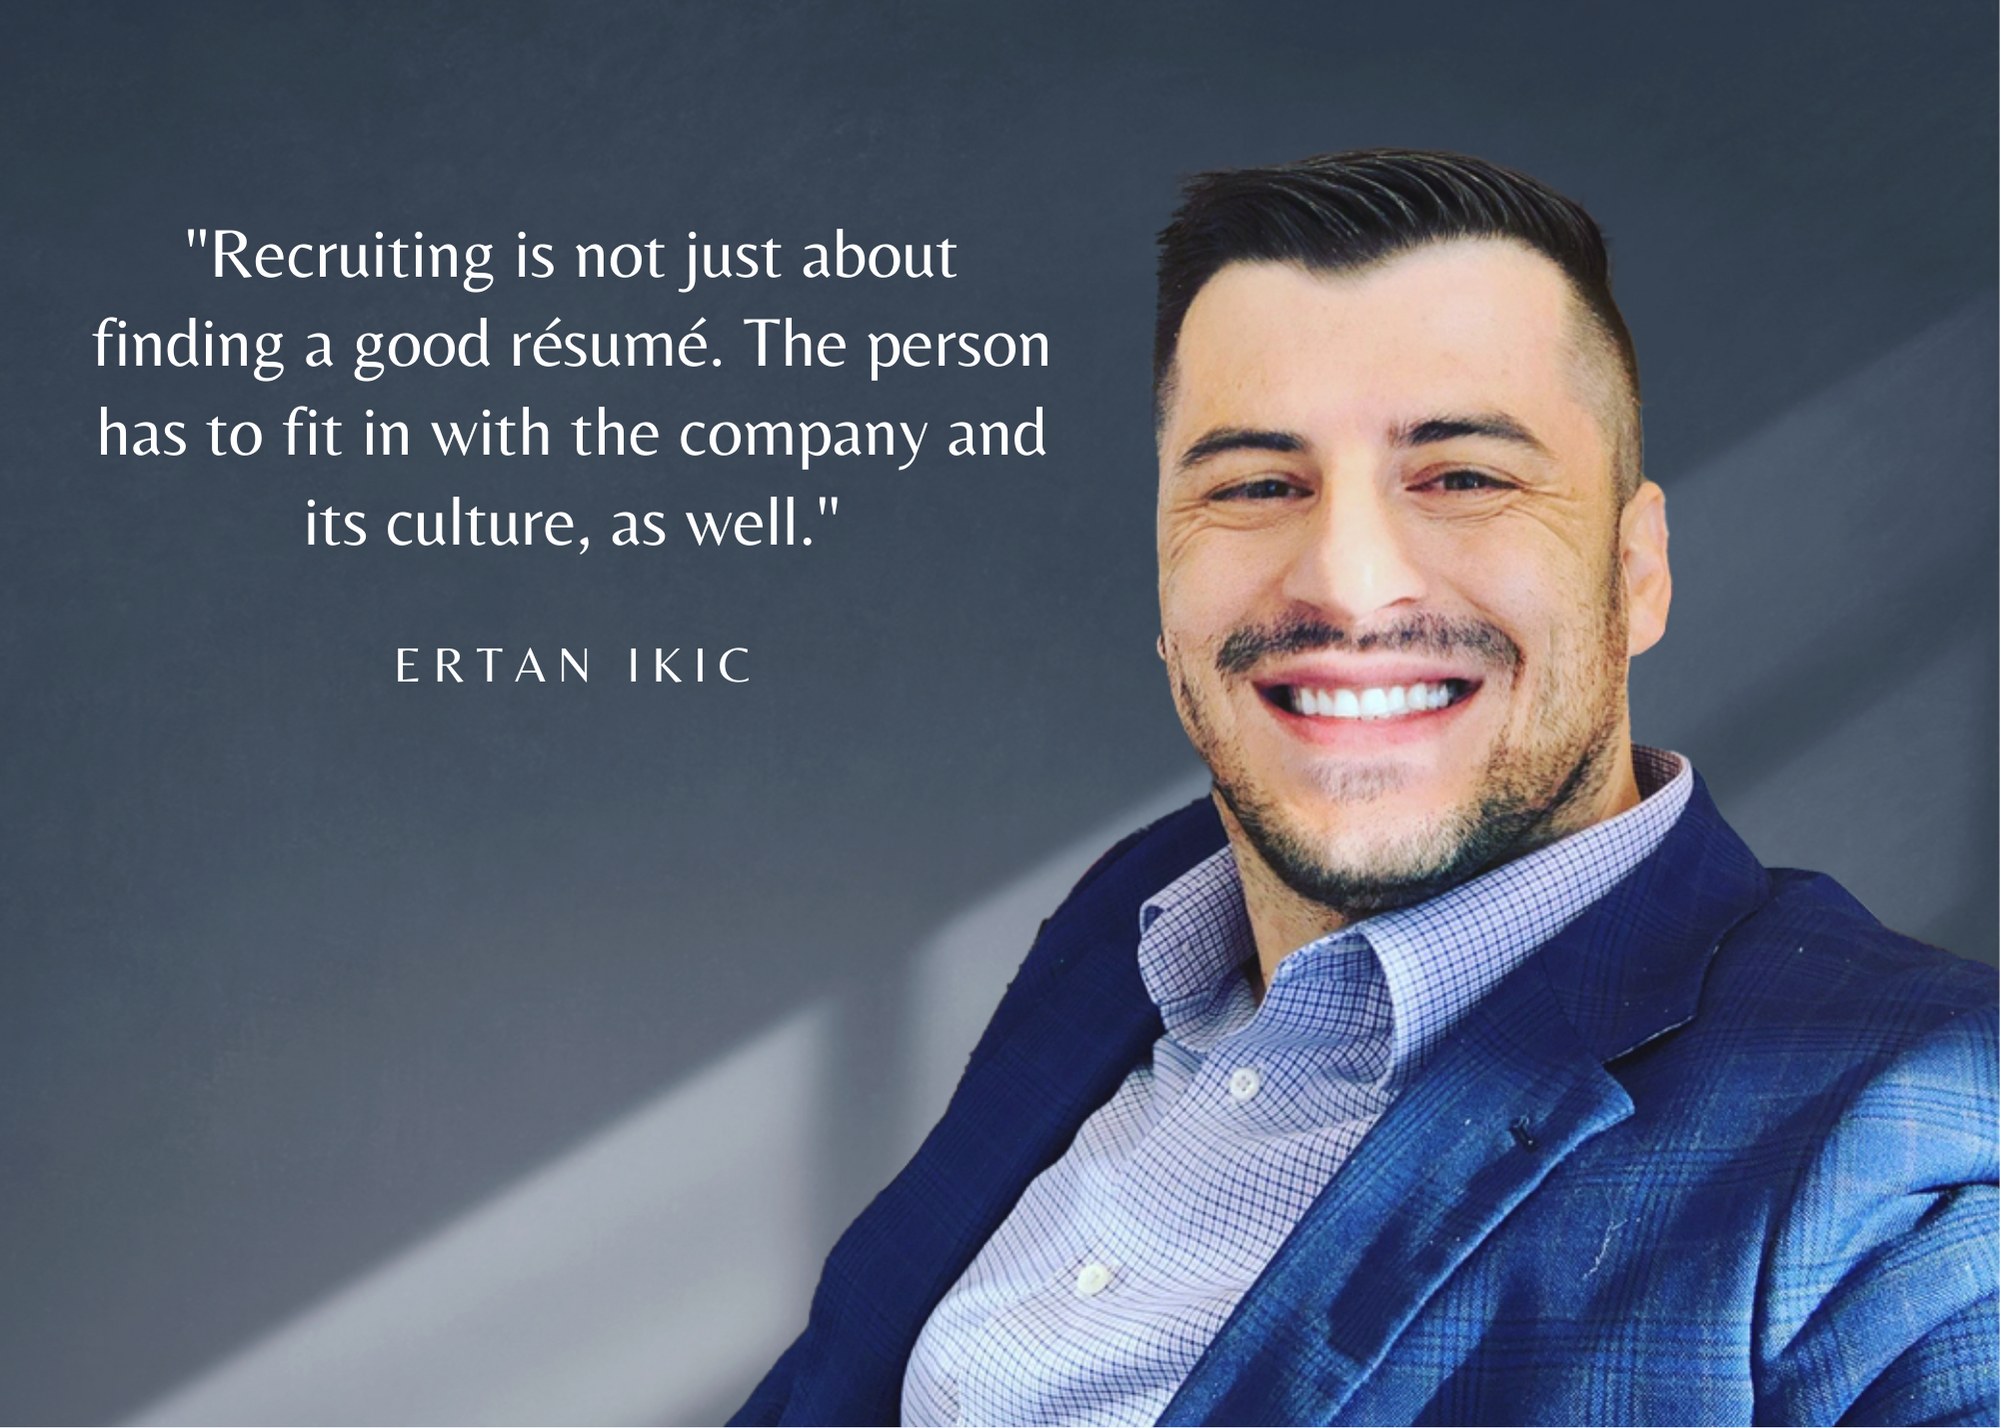 Ertan Ikic is the Subject of a New Interview